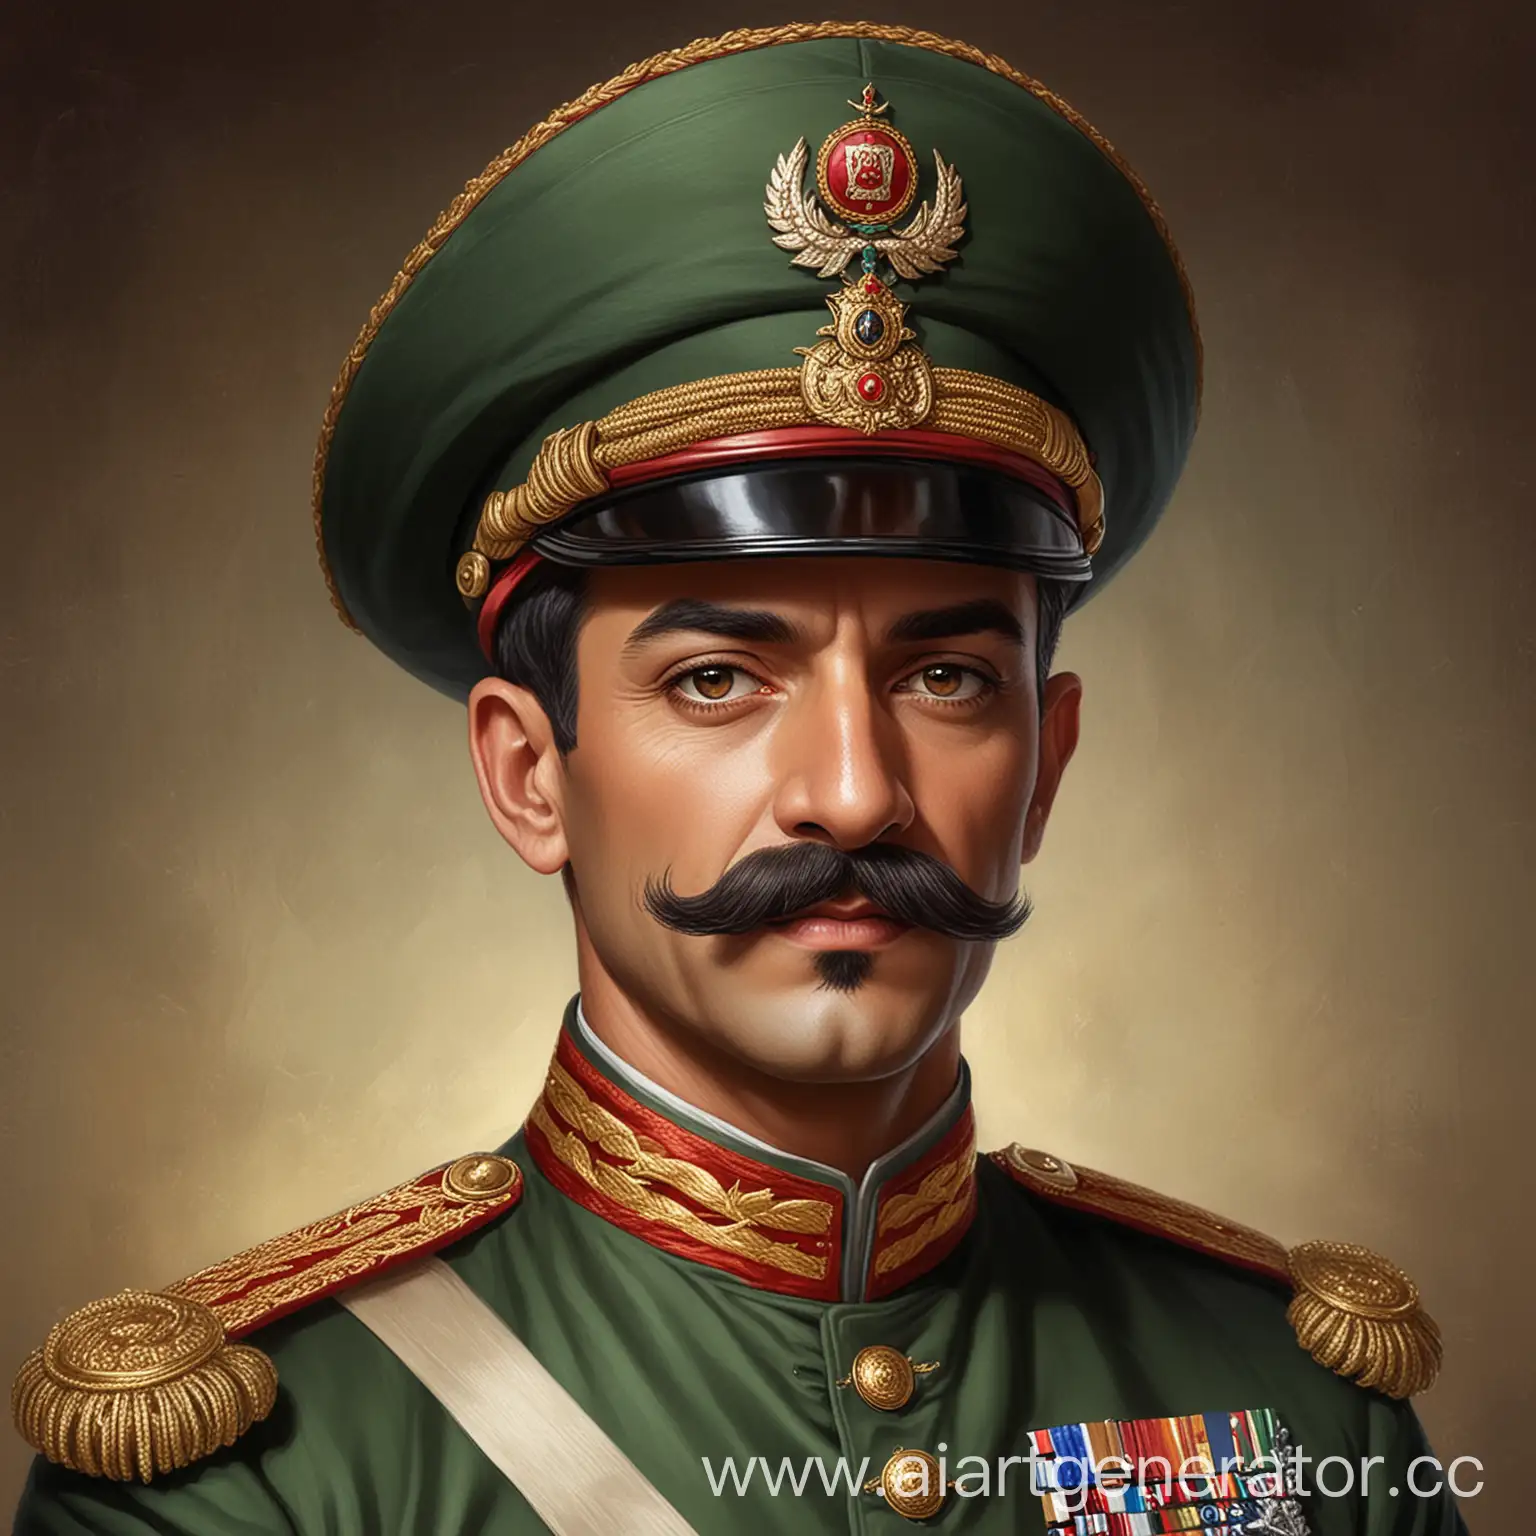 Sultan-with-Mustache-in-Military-Uniform-and-Round-Hat